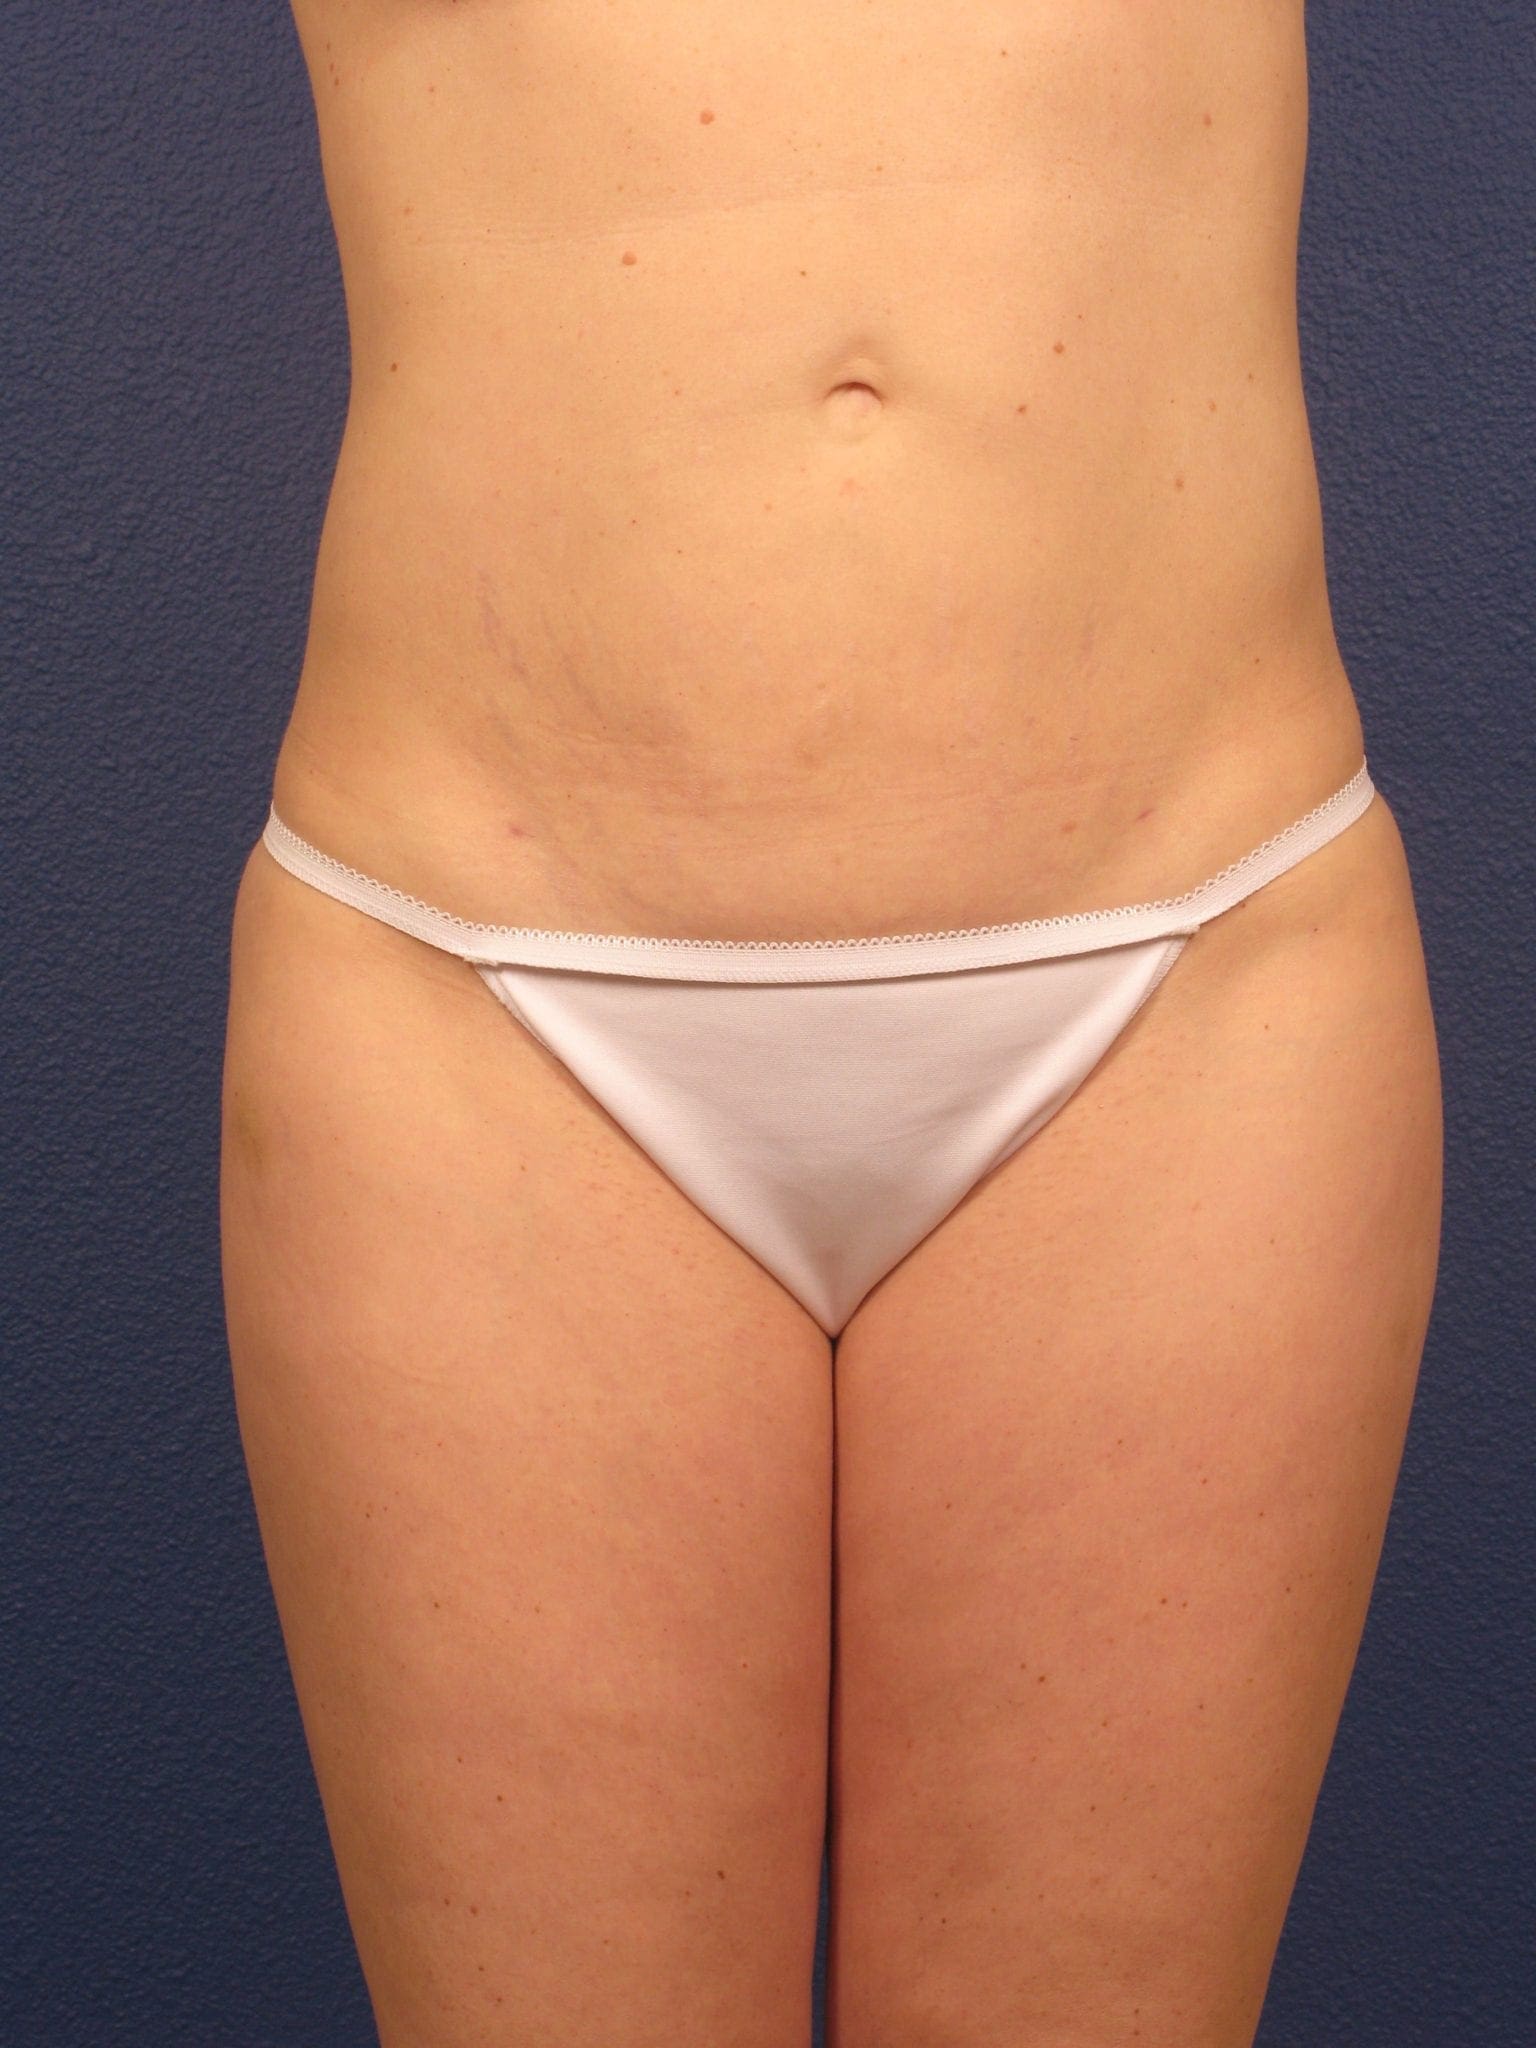 Liposuction - Case 166 - After